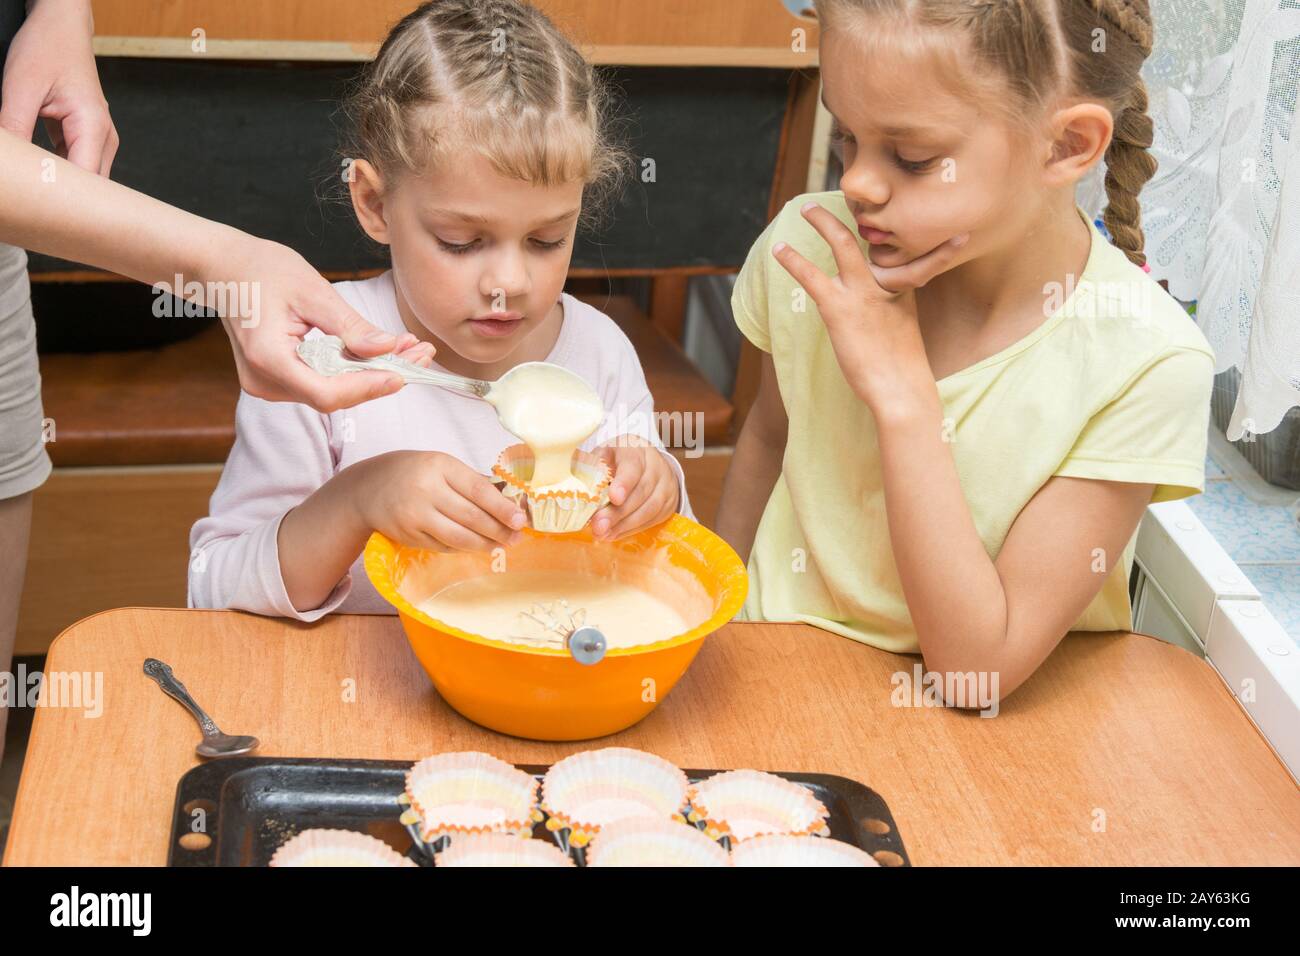 Mom helps subsidiaries to pour batter into molds for baking cakes Stock Photo